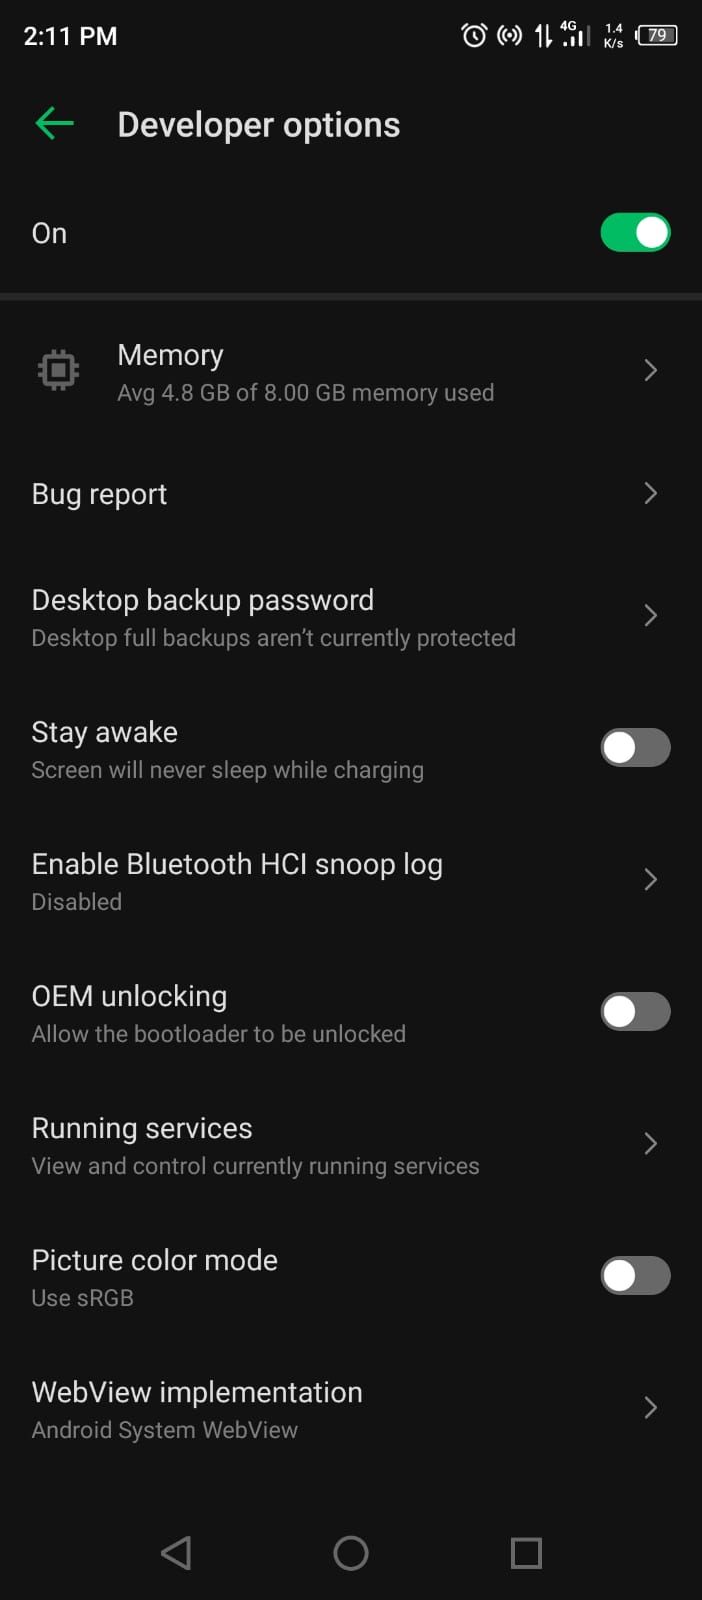 Developer Options Home in Android Settings